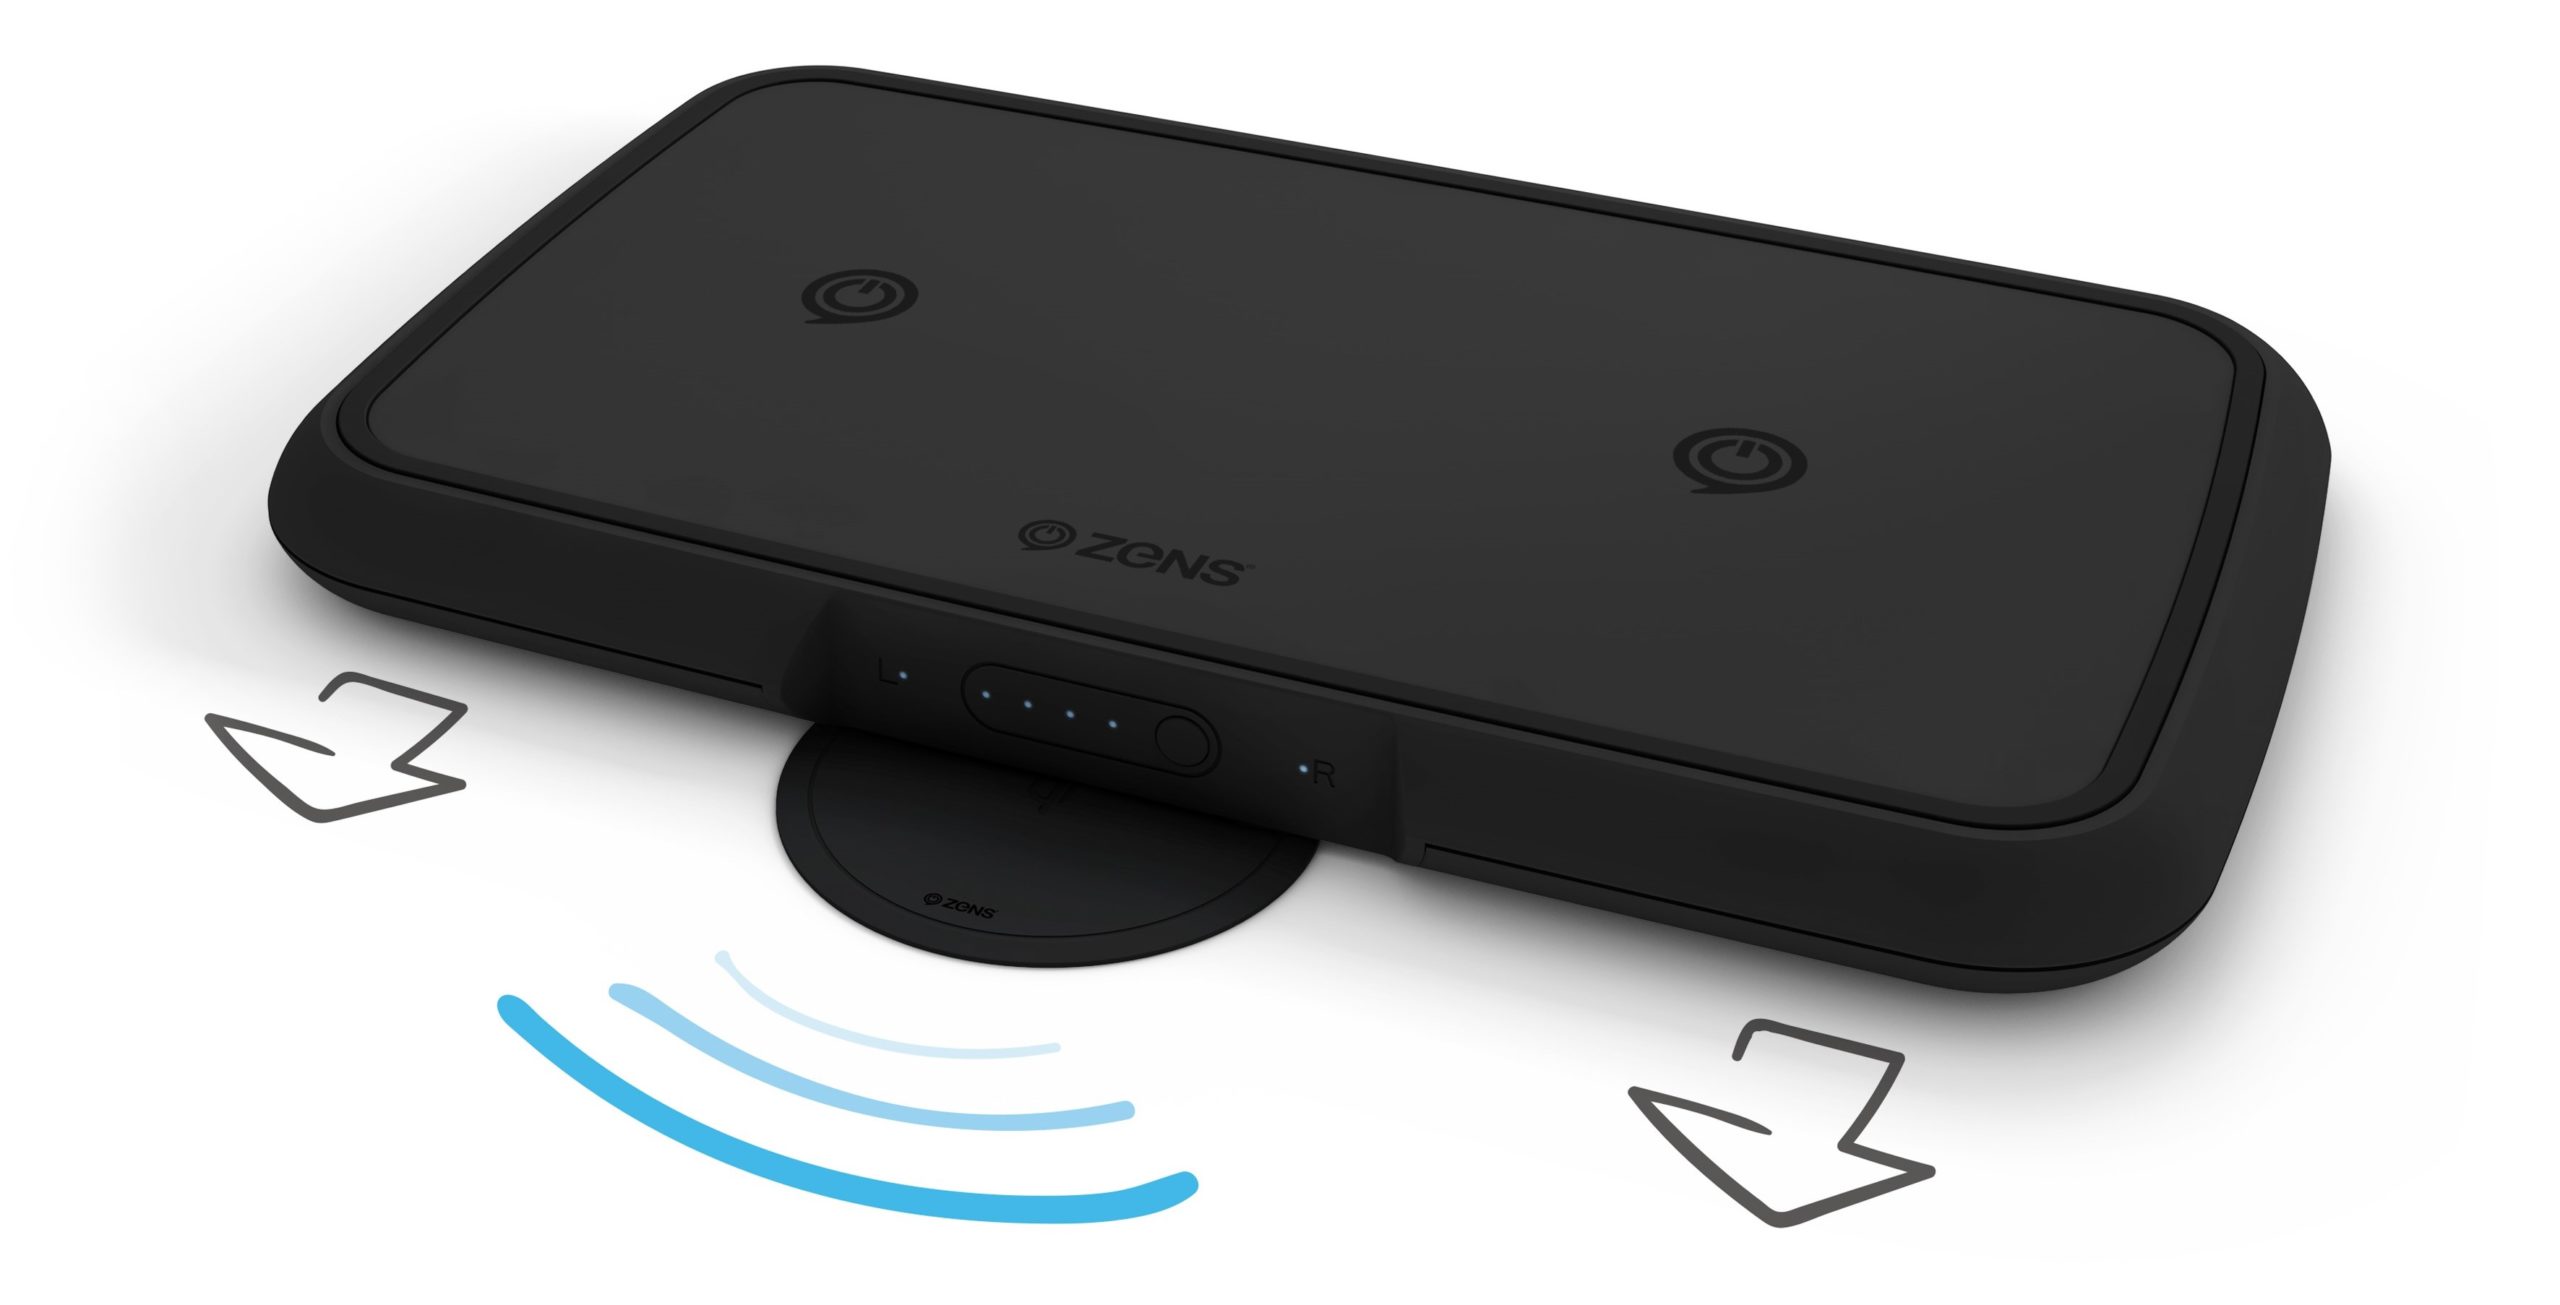 ZENS launches wireless powerbanks that are also wirelessly rechargeable